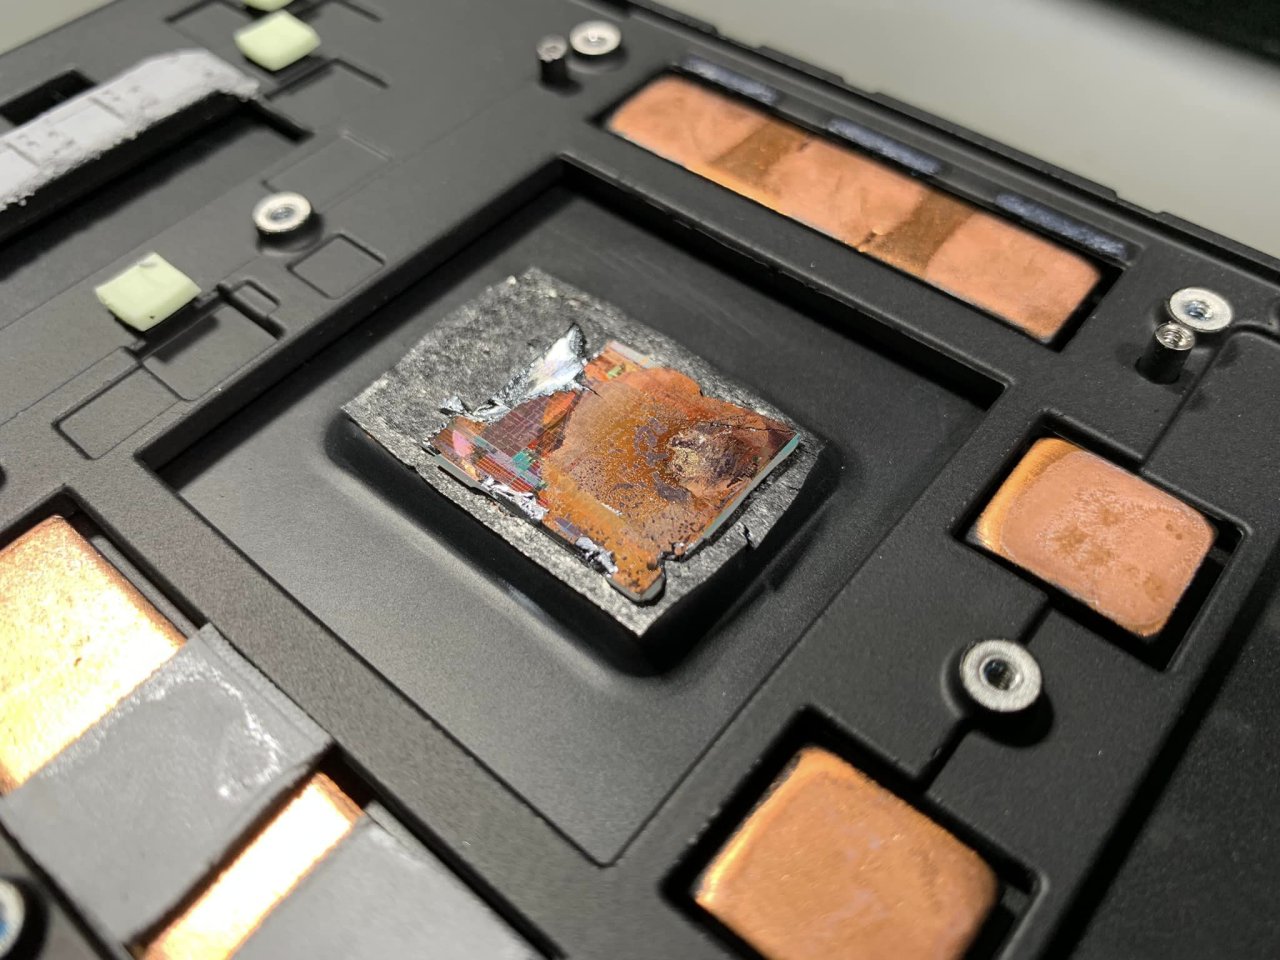 Broken Radeon RX 6000 cards are said to be caused by moisture damage